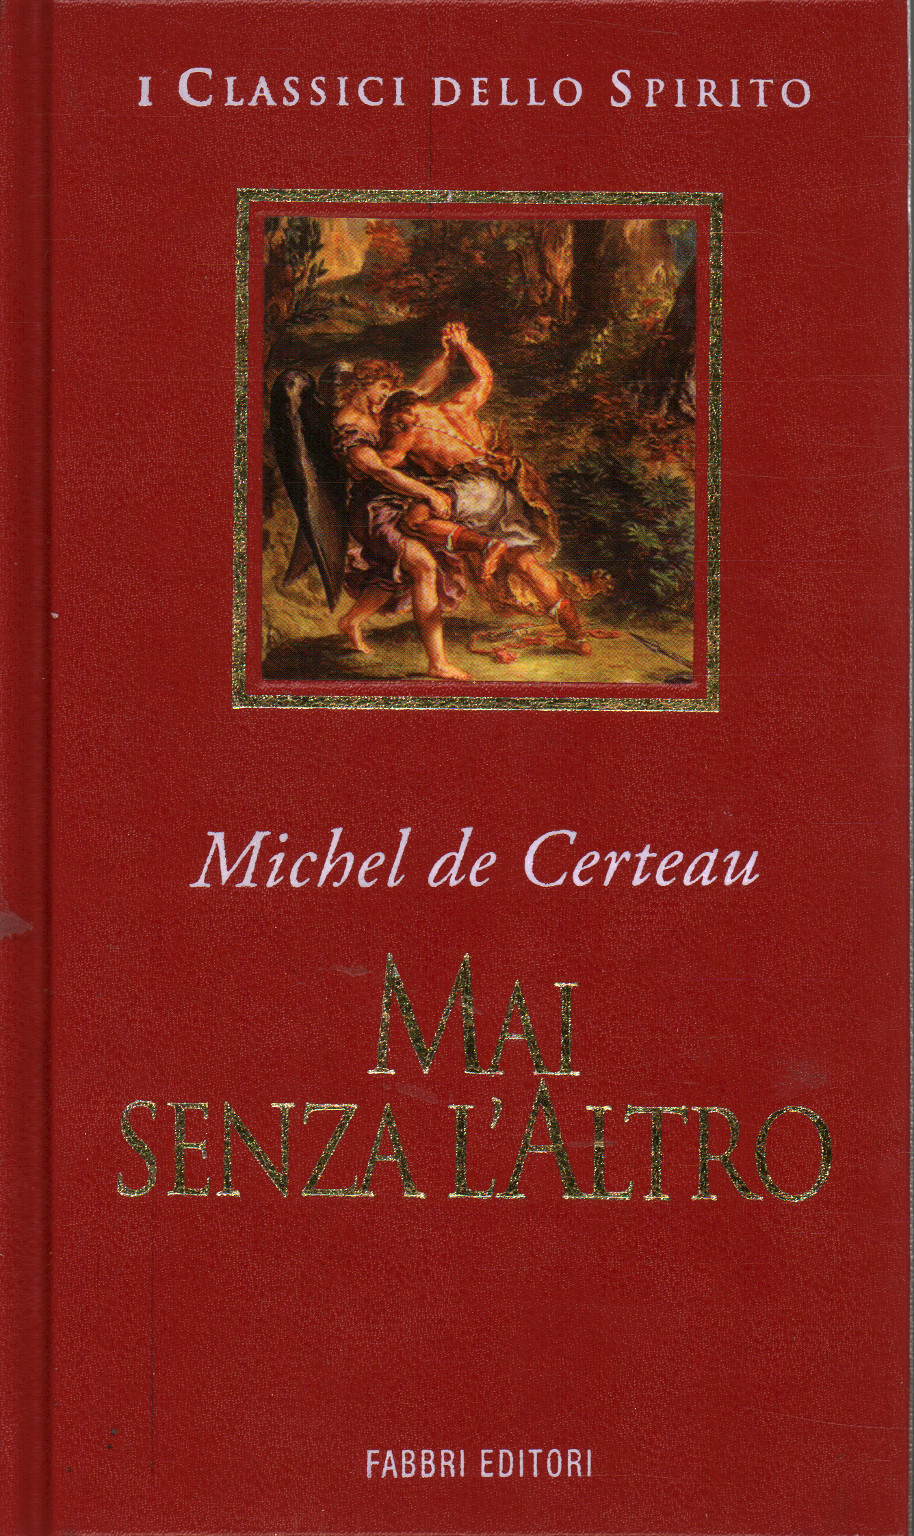 Never be without the other, Michel de Certau